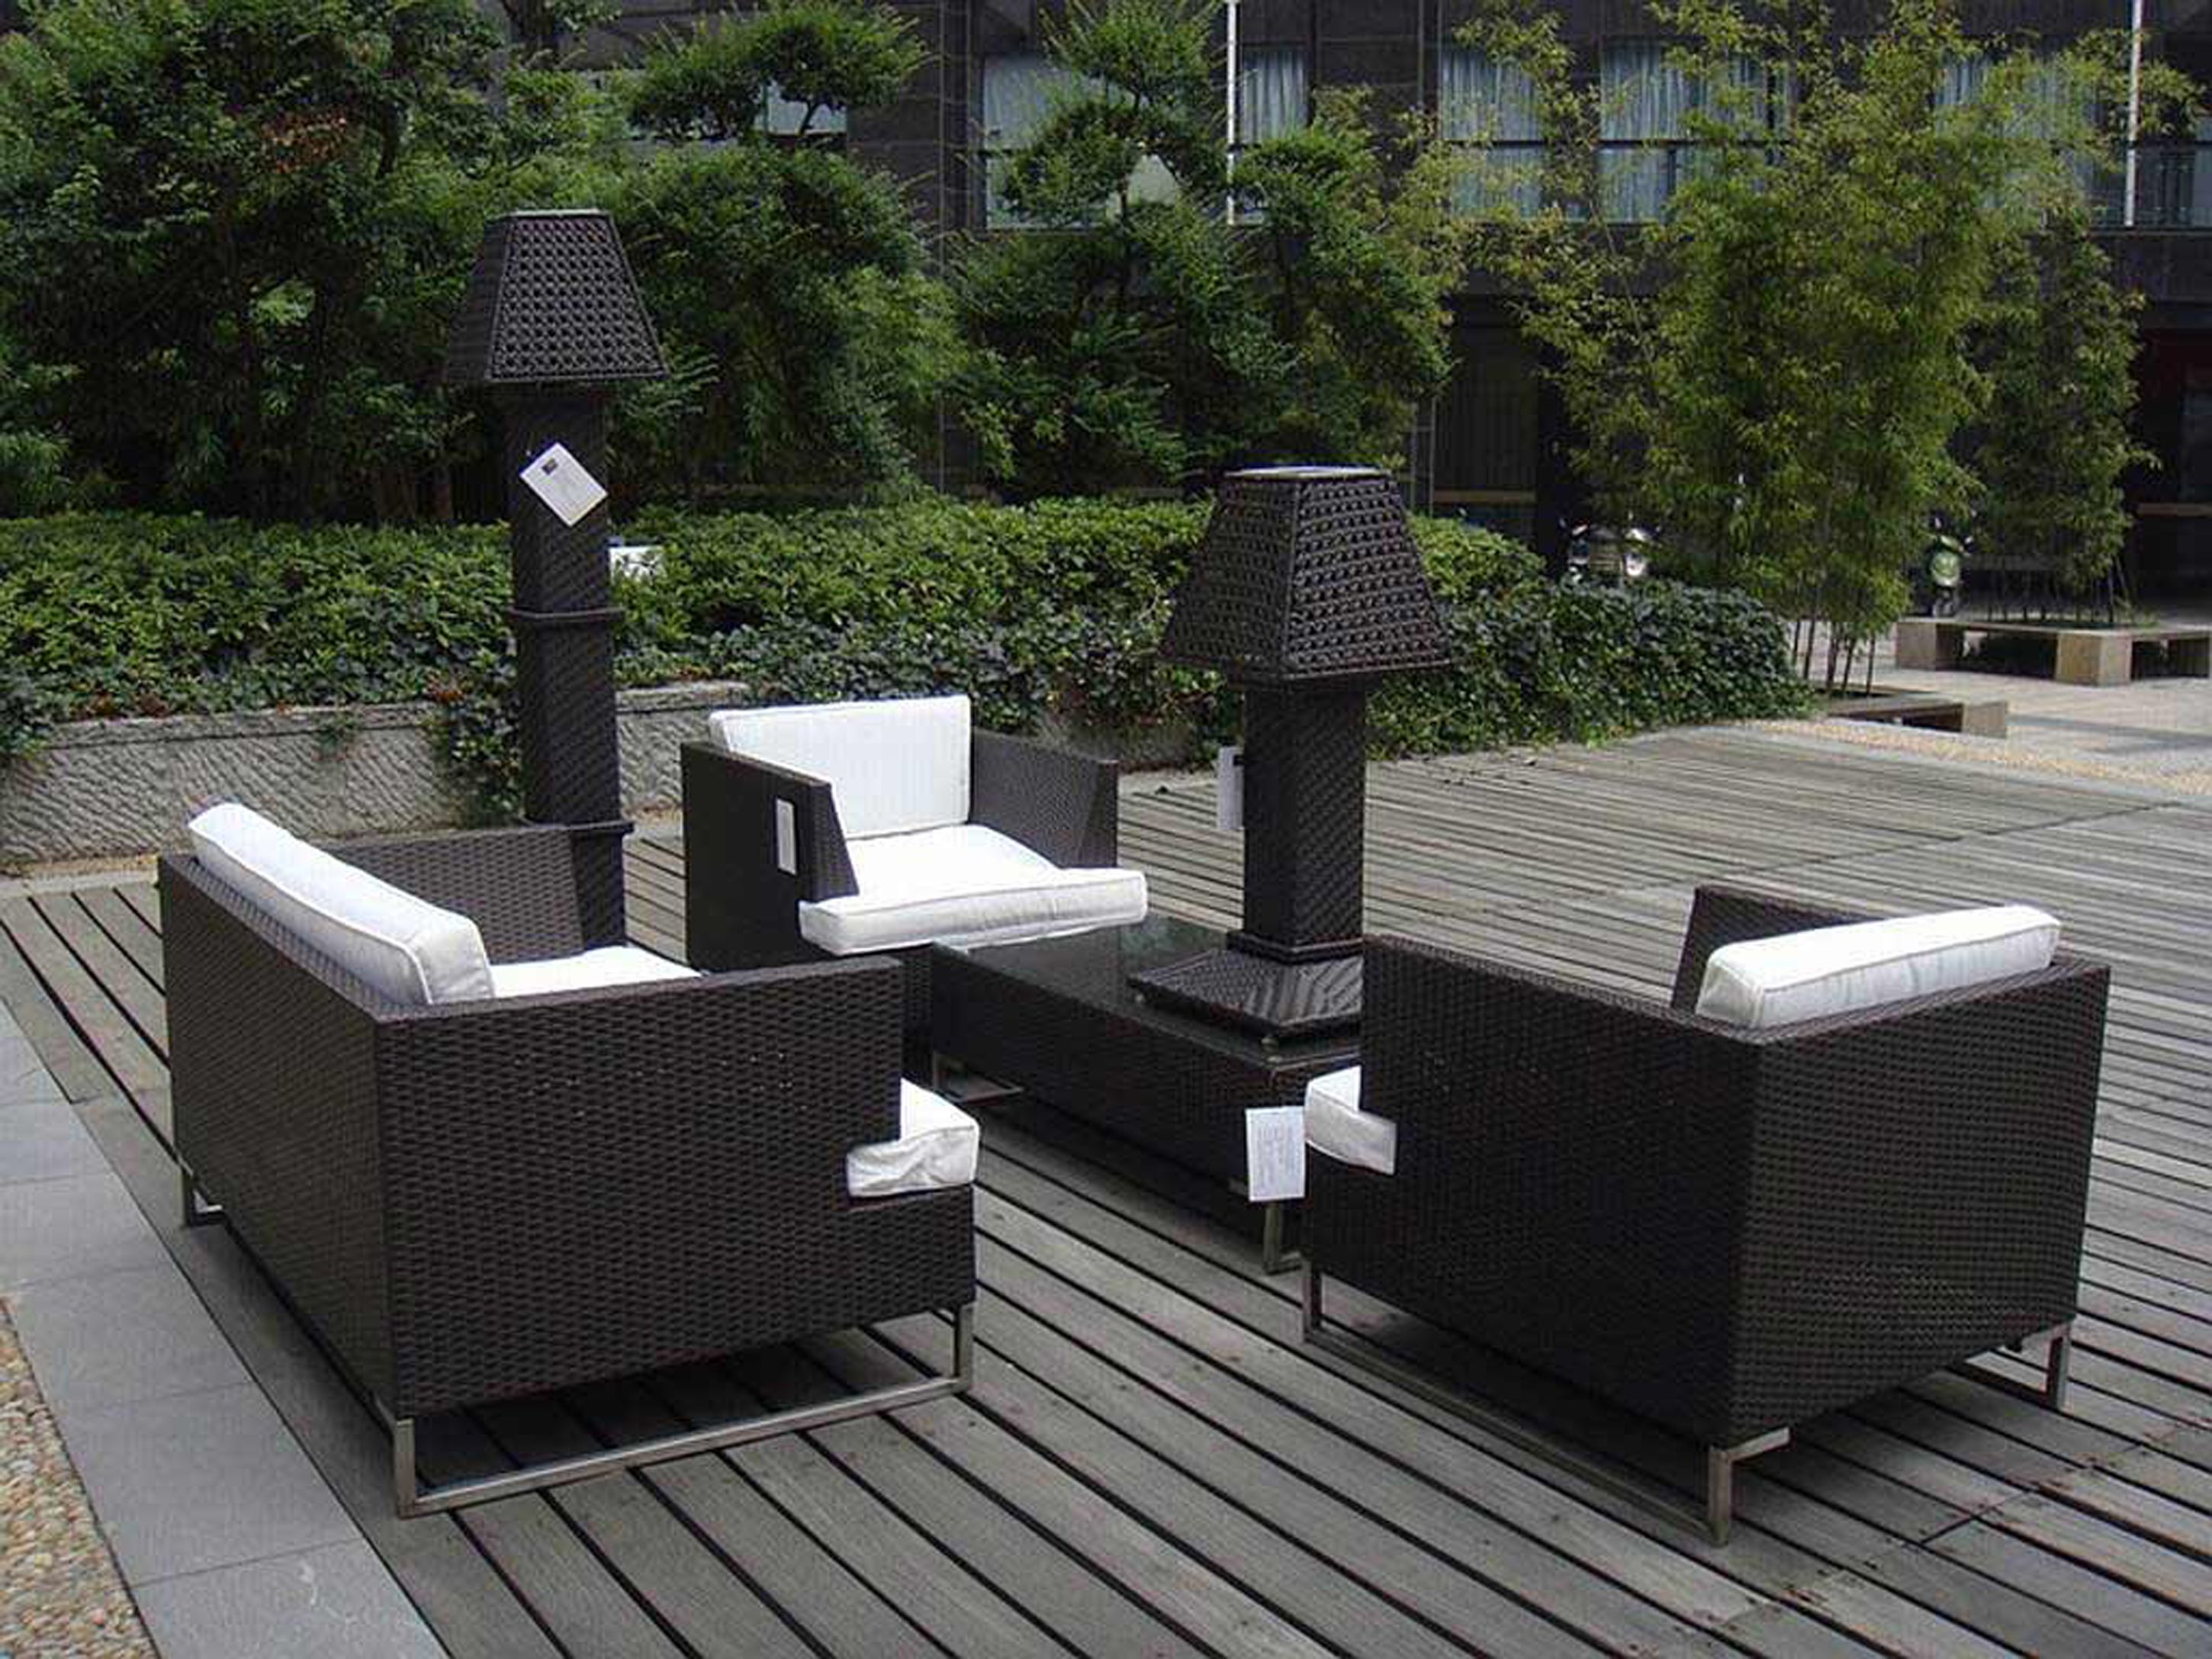 Luxury Modern Outdoor Design Idea With Black Wicker Sofas With White Seat Cushions And Black Coffee Table With Black Desk Lamp Affordable Modern Outdoor Design Ideas (View 114 of 123)